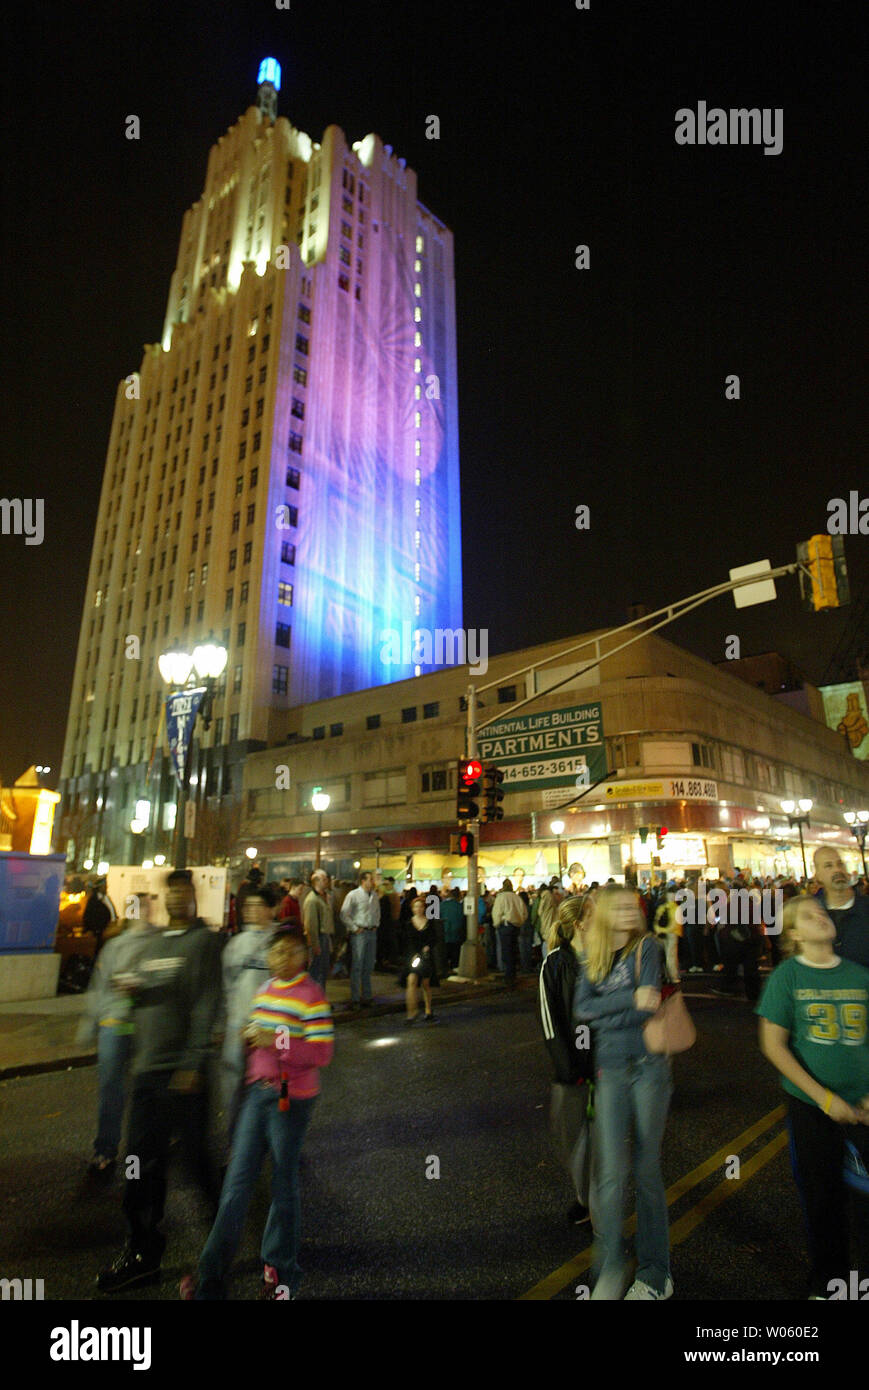 Thousands meander on Grand Avenue enjoying the 60 degree temperatures during First Night St. Louis in St. Louis on December 31, 2004. First Night St. Louis is a alcohol-free, visual and performing arts festival geared toward family oriented actvities to welcome the New Year. (UPI Photo/Bill Greenblatt) Stock Photo